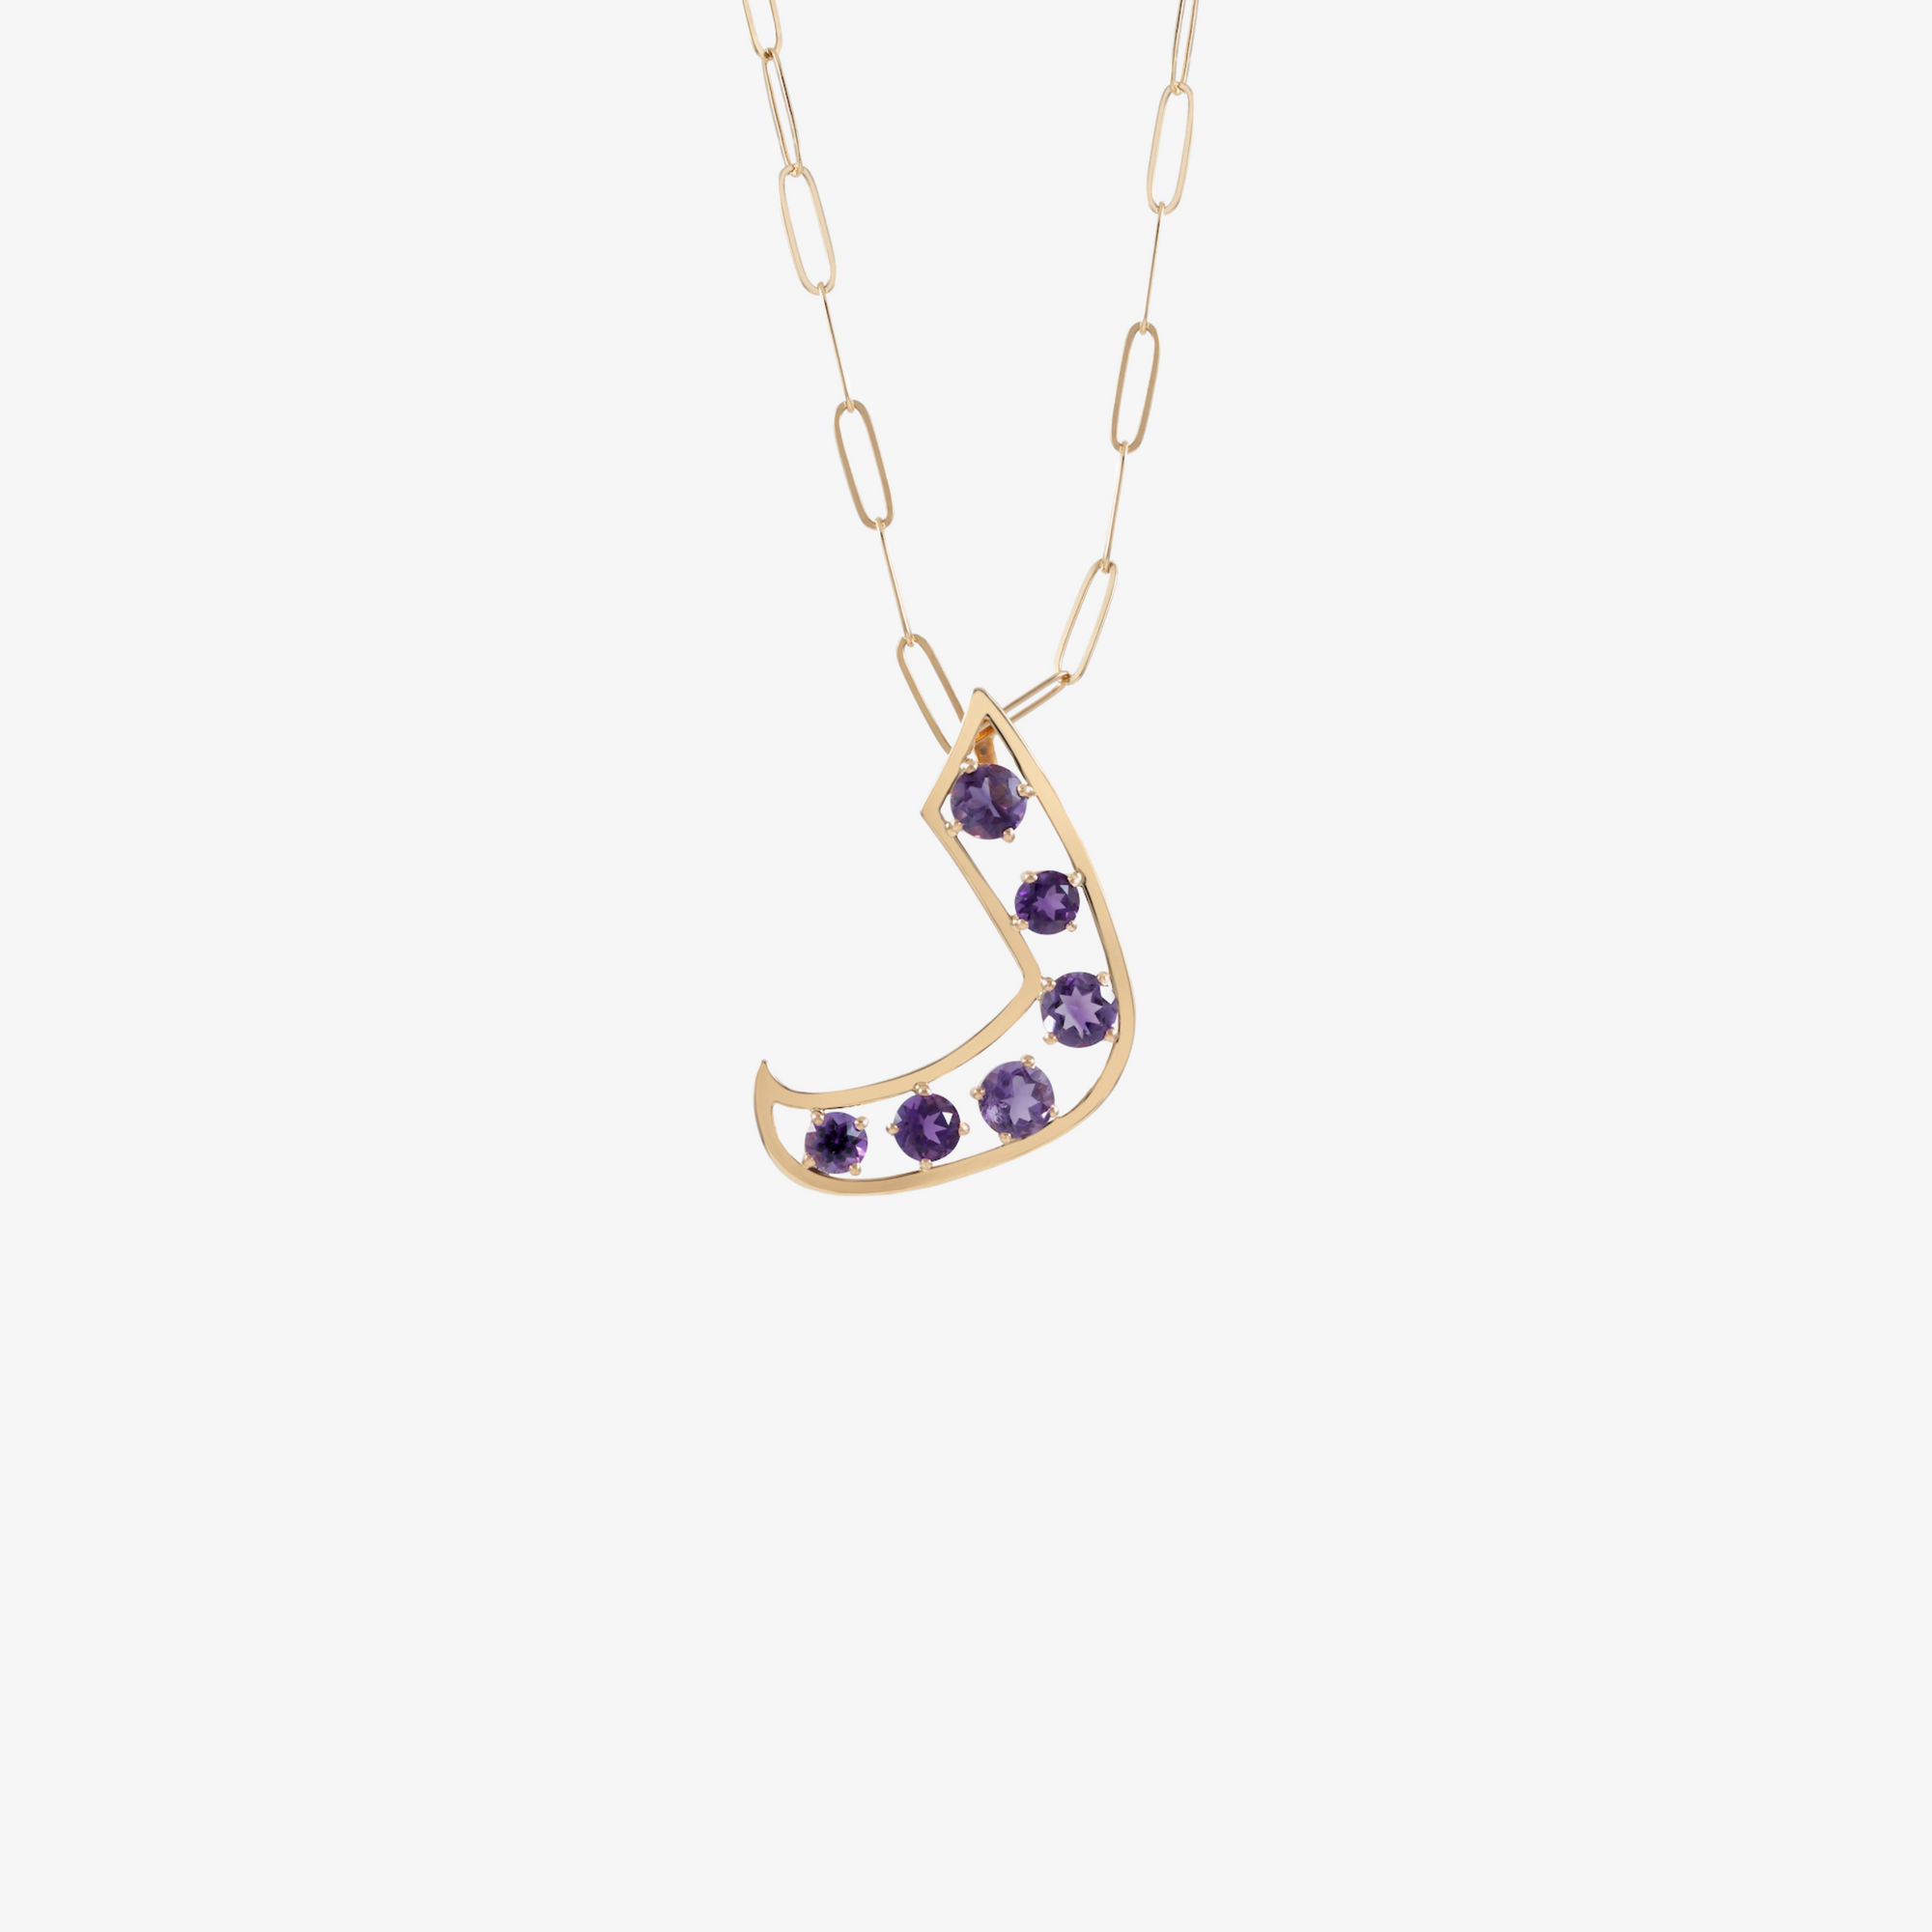 OULA - Gold Frame Necklace with Amethyst Stones